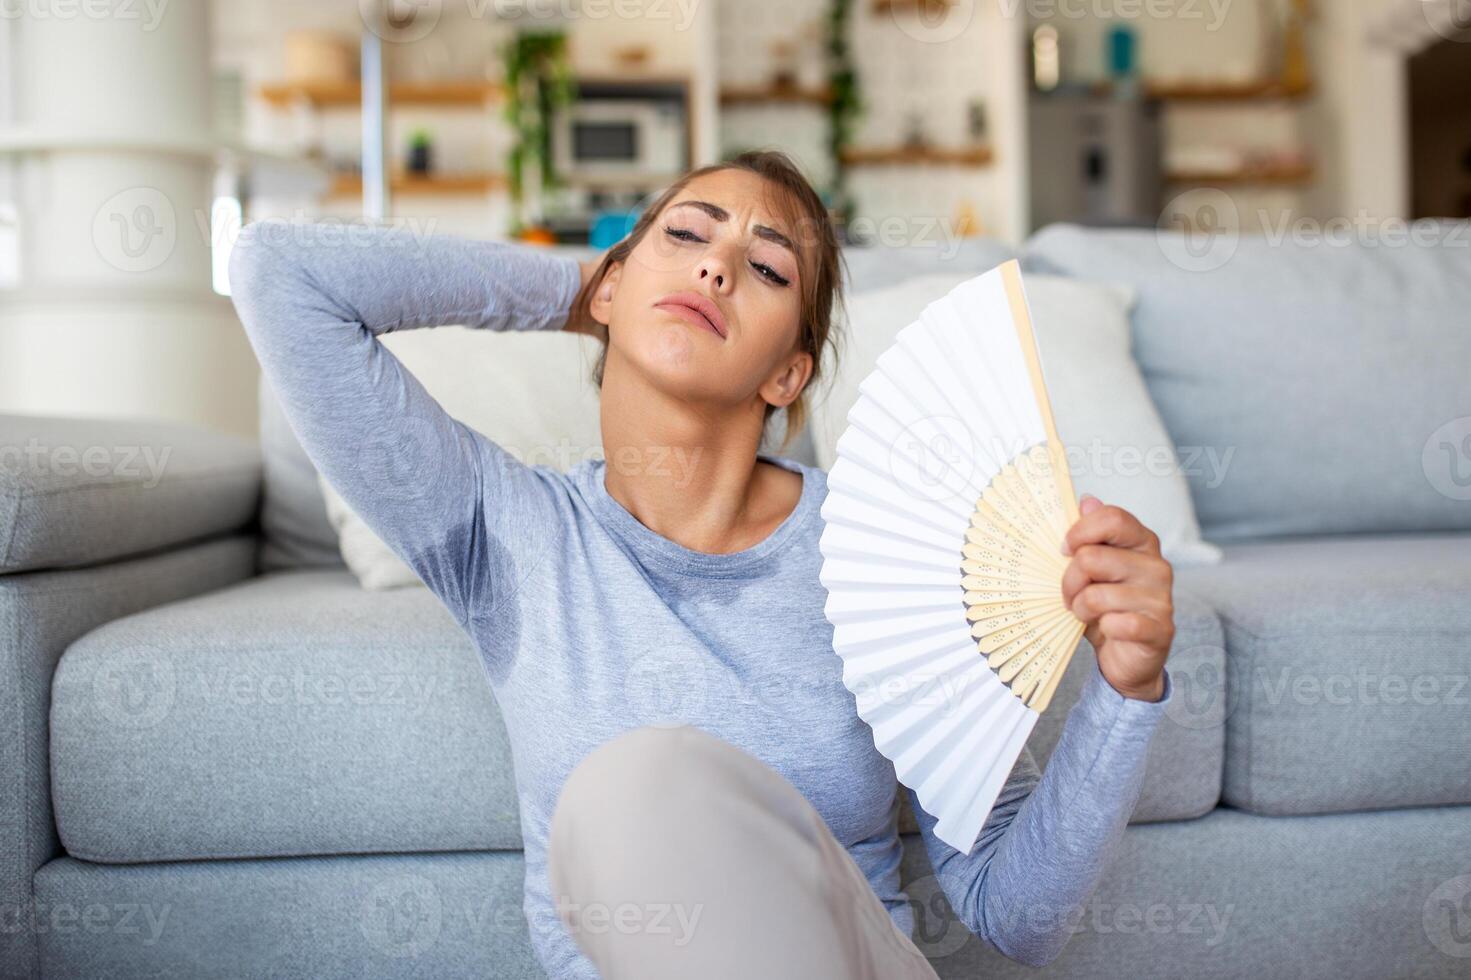 woman waving a fan, battles overheating and summer heat at home. Her health and hormones are affected, drained by exhaustion due to the lack of air conditioning. The concept of heatstroke photo